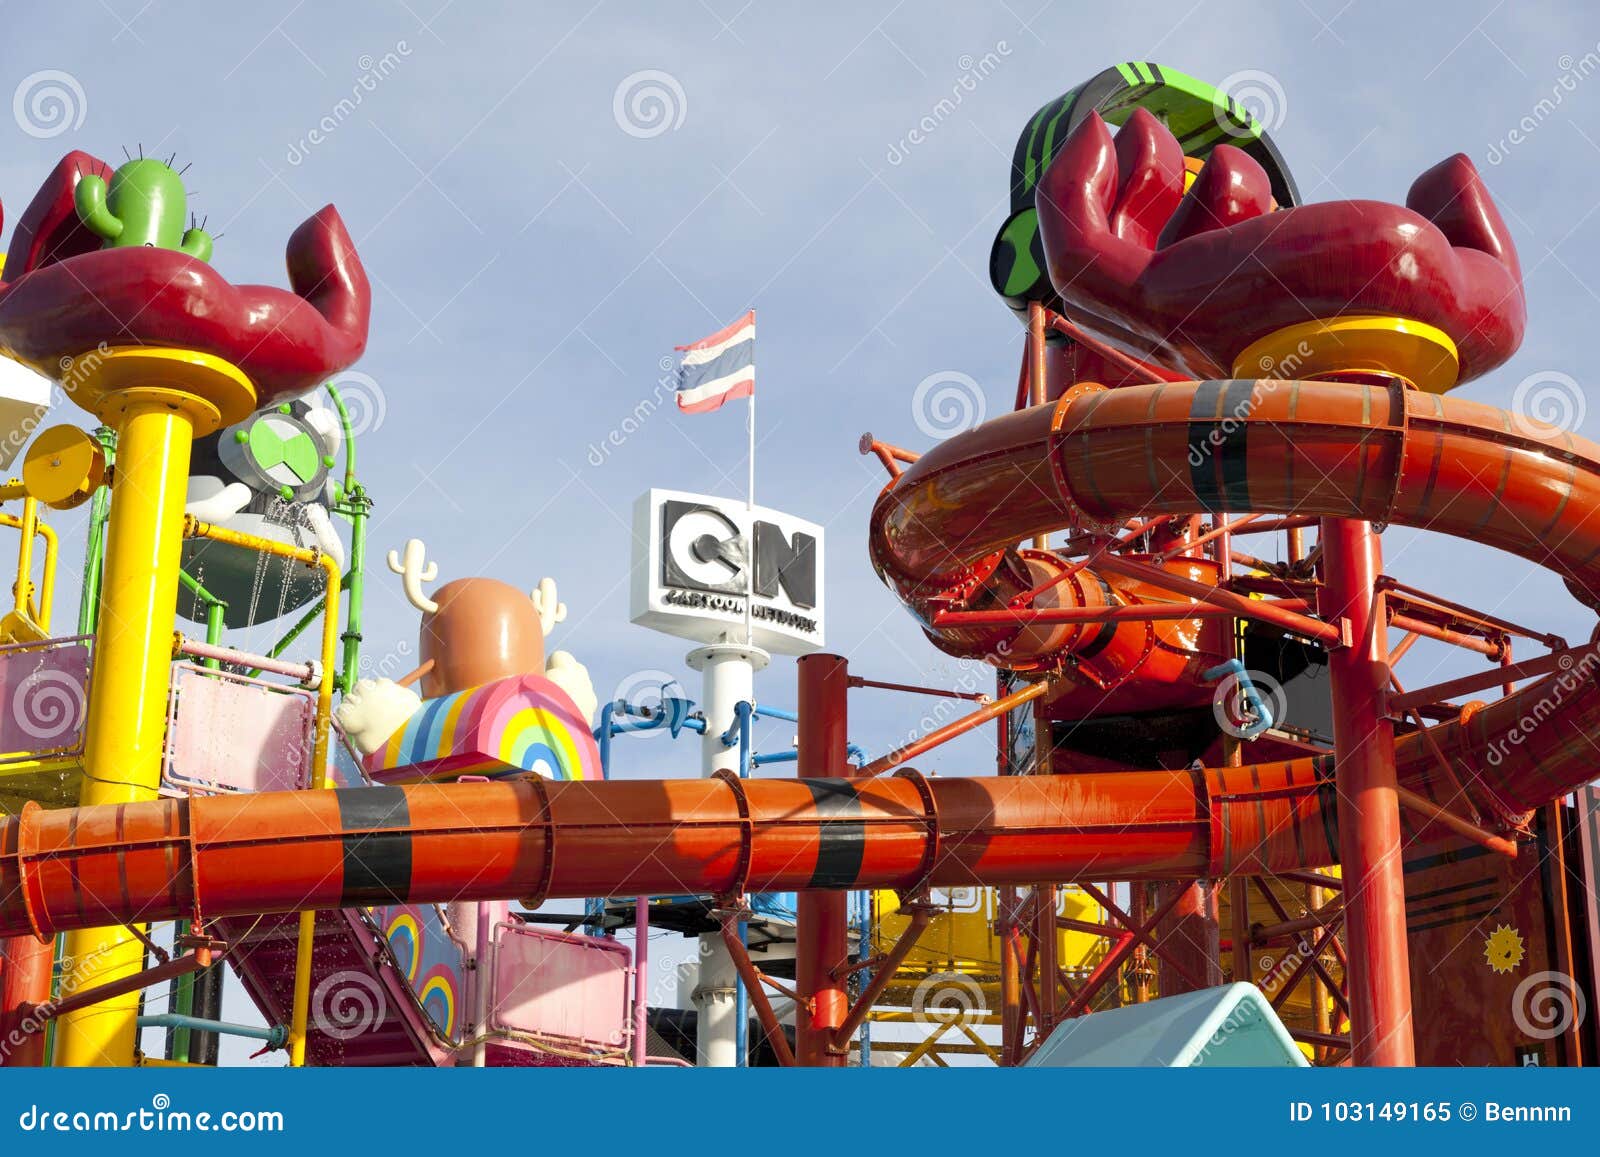 Cartoon Network Amazone Water Park Editorial Image - Image of rippled,  poolside: 103149165